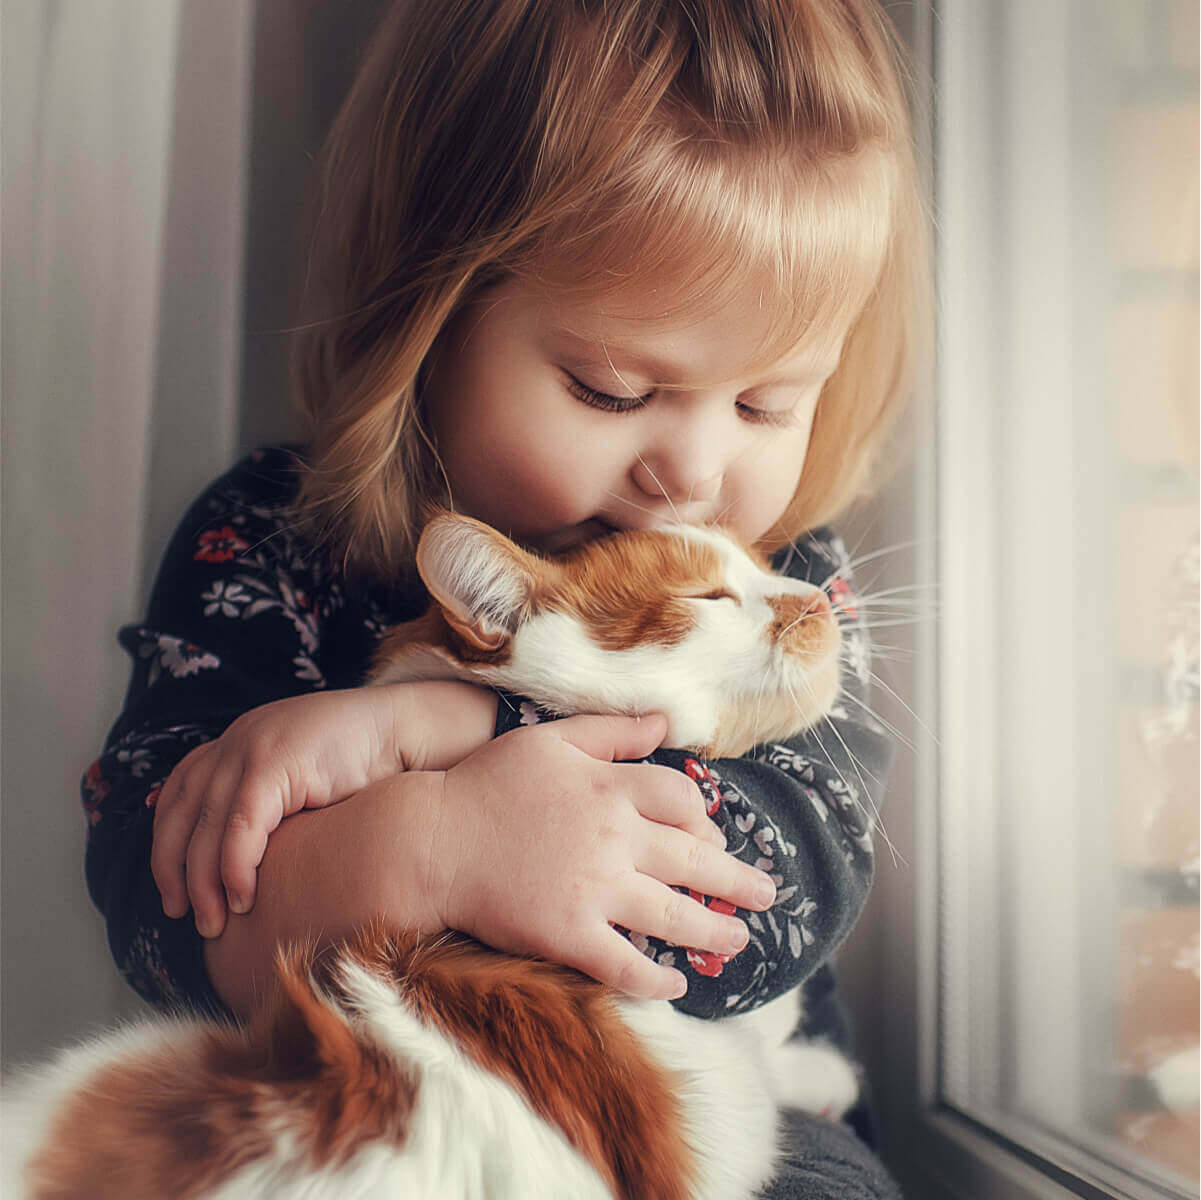 Small girl holding a cat